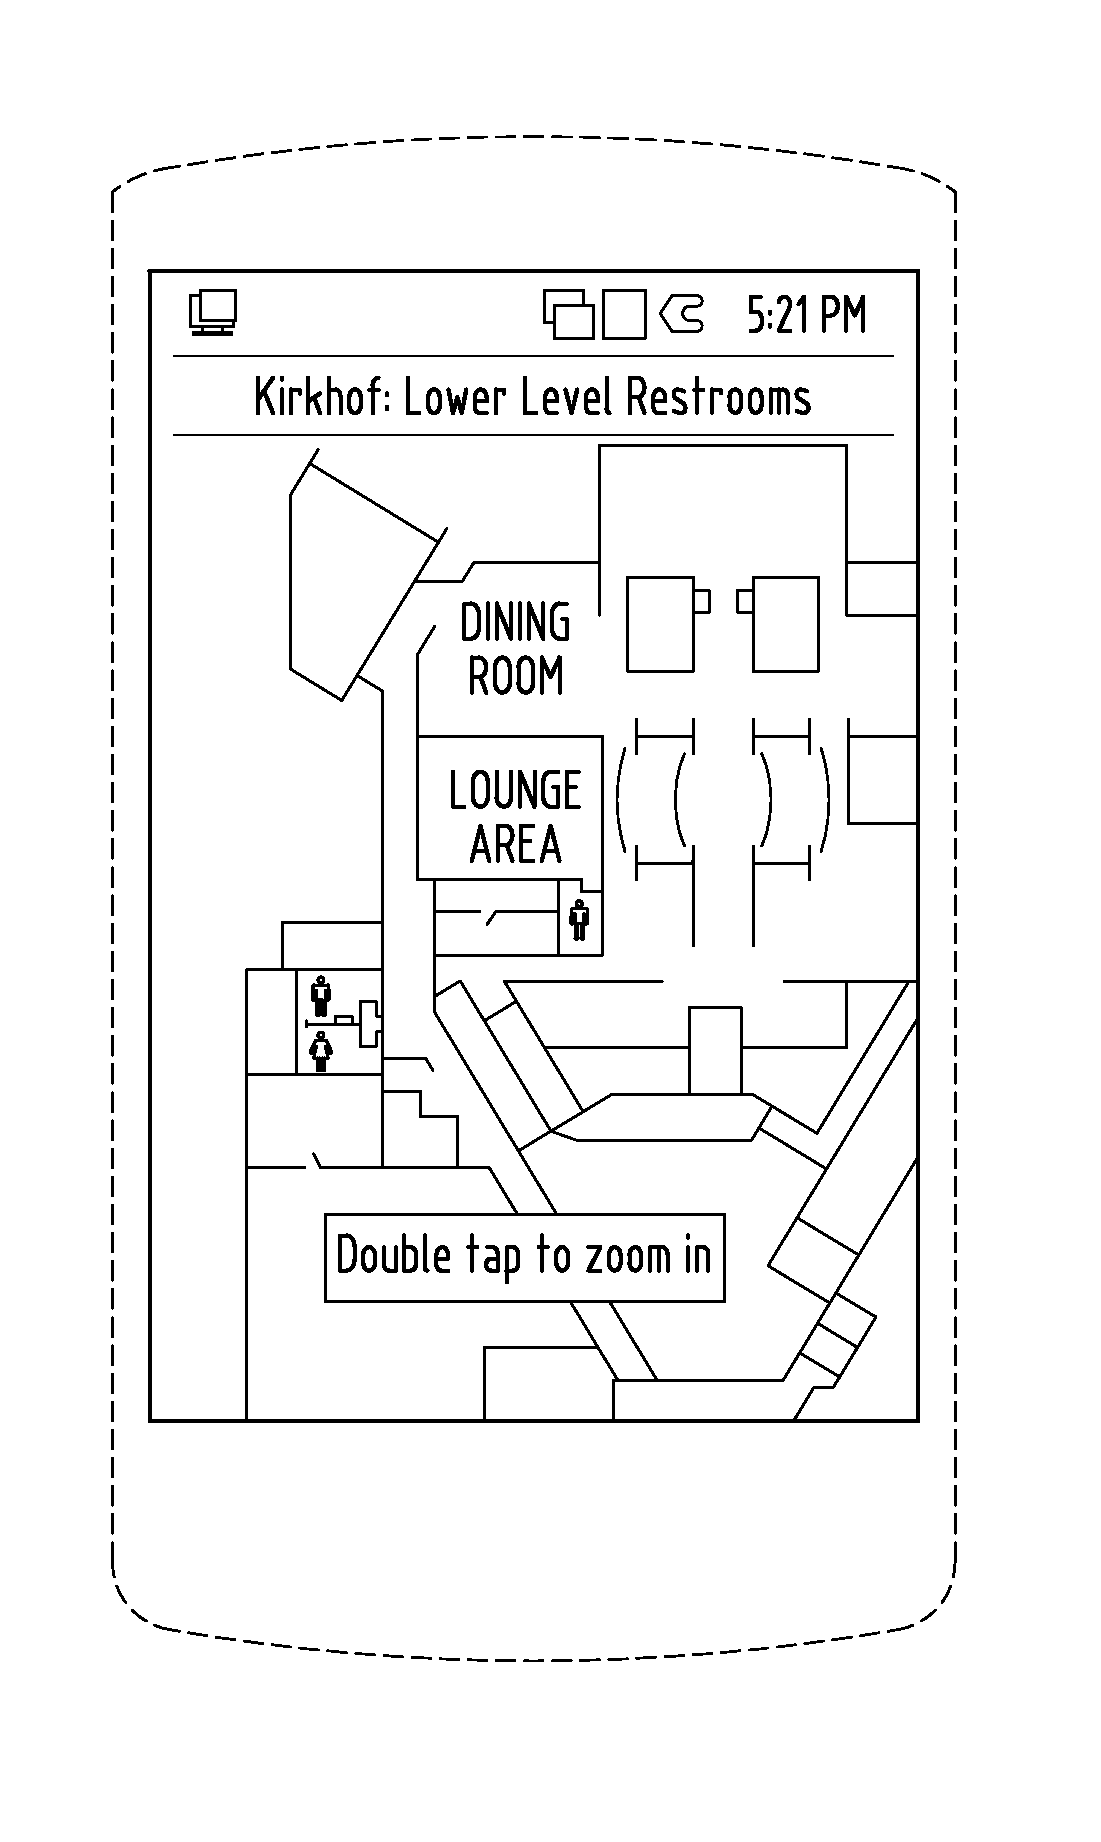 Systems and methods for providing information pertaining to physical infrastructure of a building or property